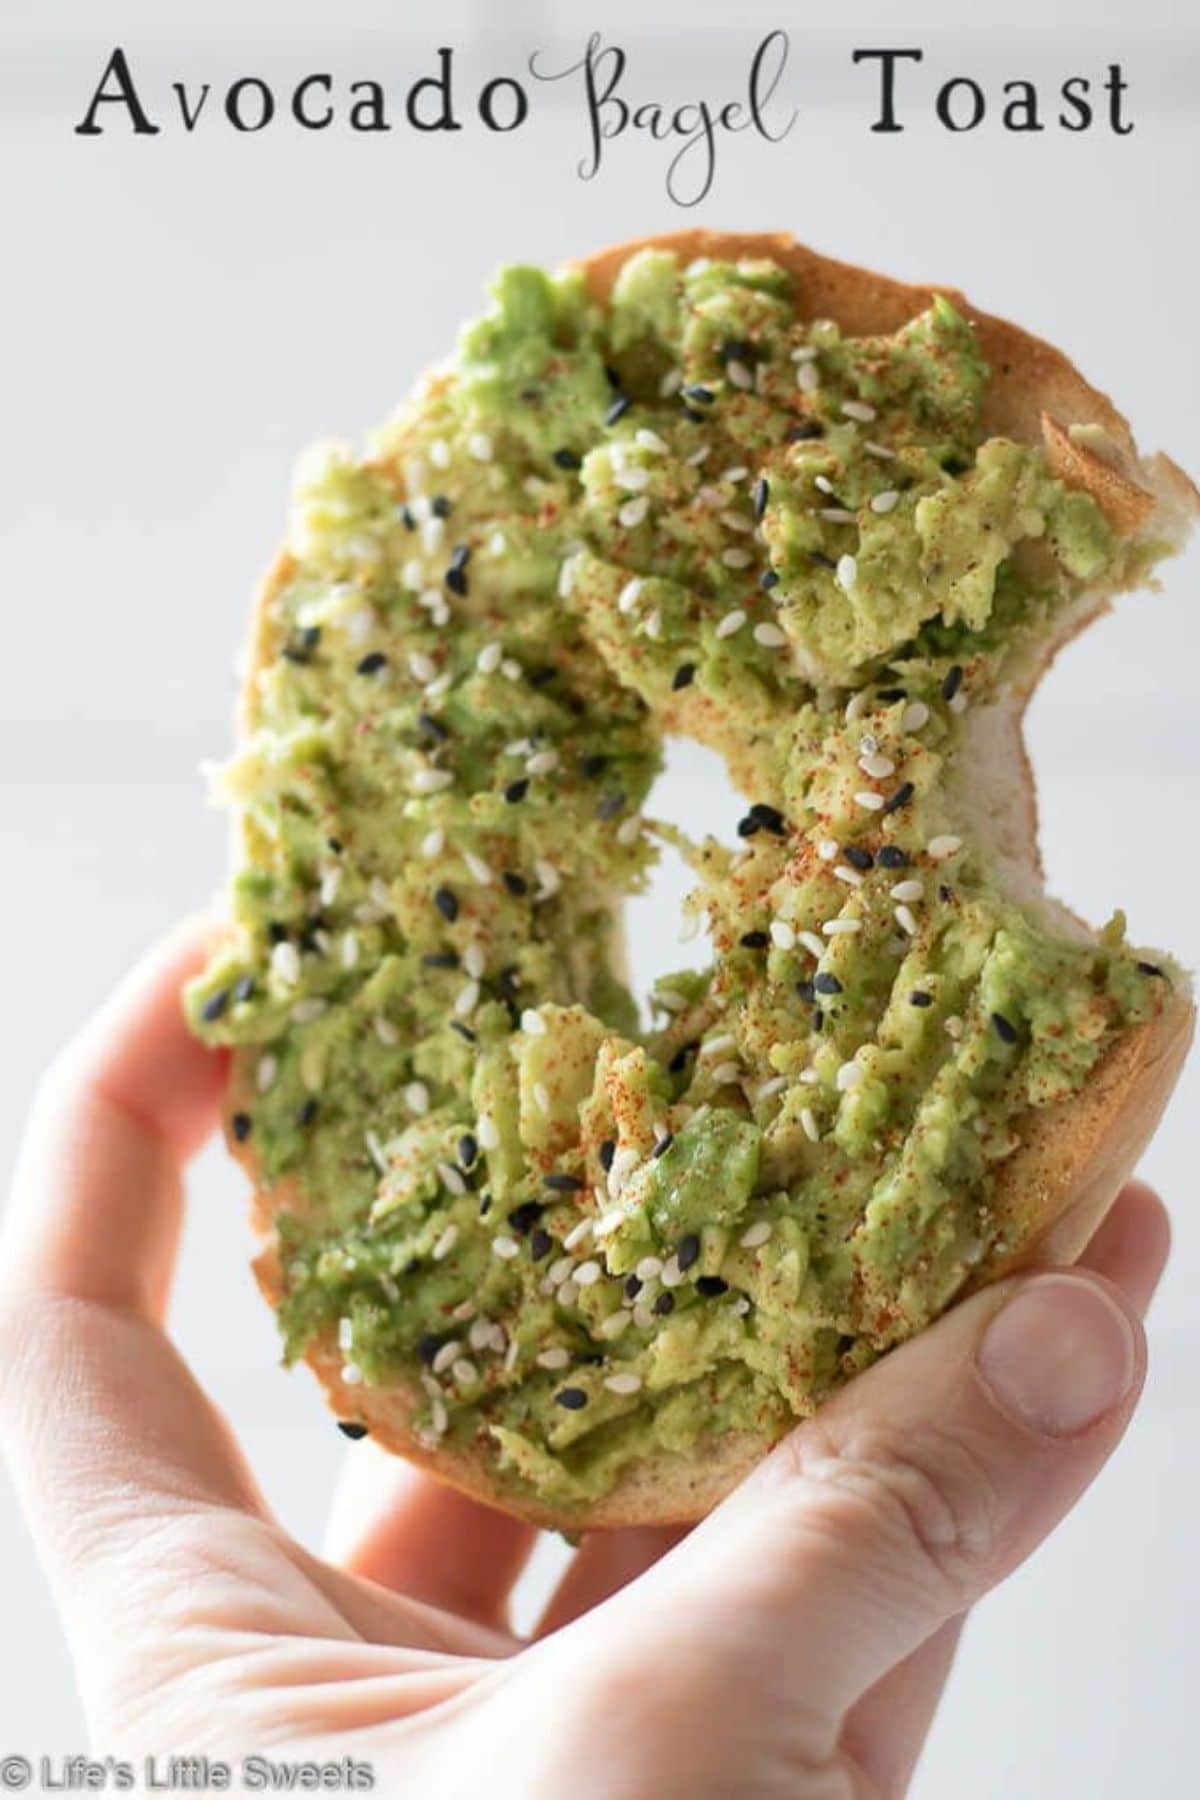 Hand holding half a bagel with avocado spread